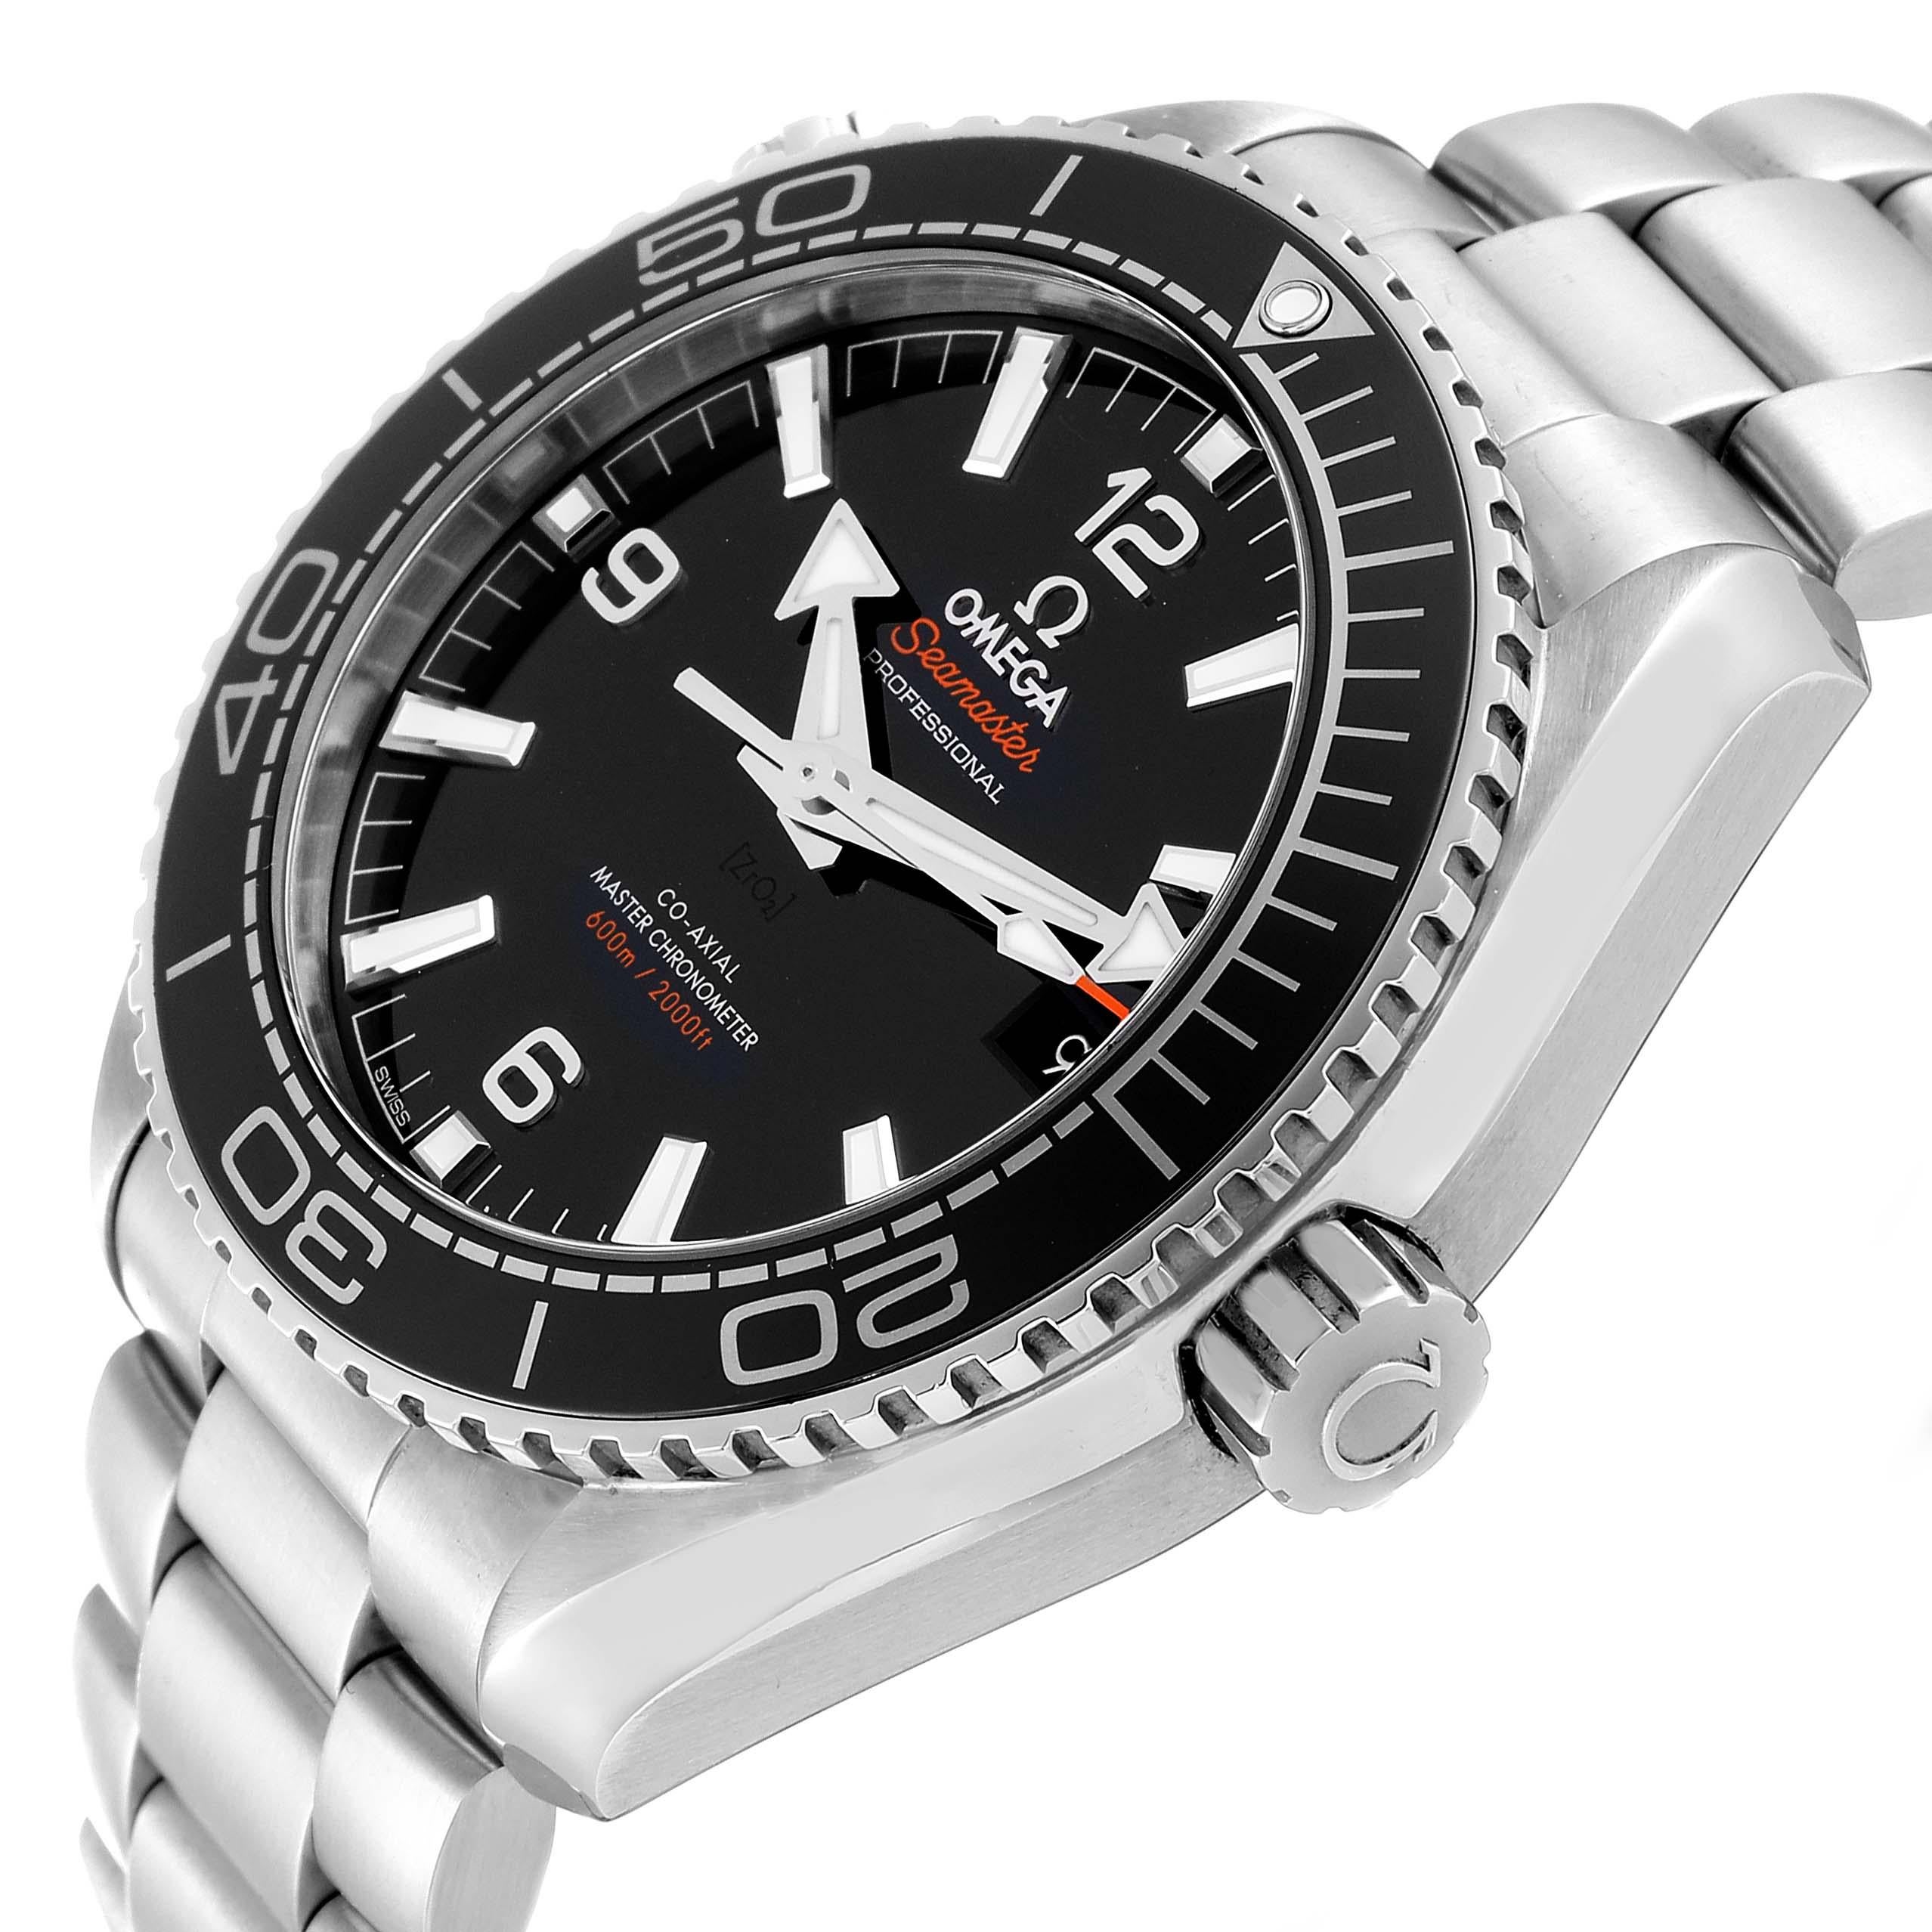 Omega Seamaster Planet Ocean Steel Mens Watch 215.30.44.21.01.001 Box Card. Automatic self-winding movement with Co-Axial escapement. Certified Master Chronometer, approved by METAS, resistant to magnetic fields reaching 15,000 gauss. Free